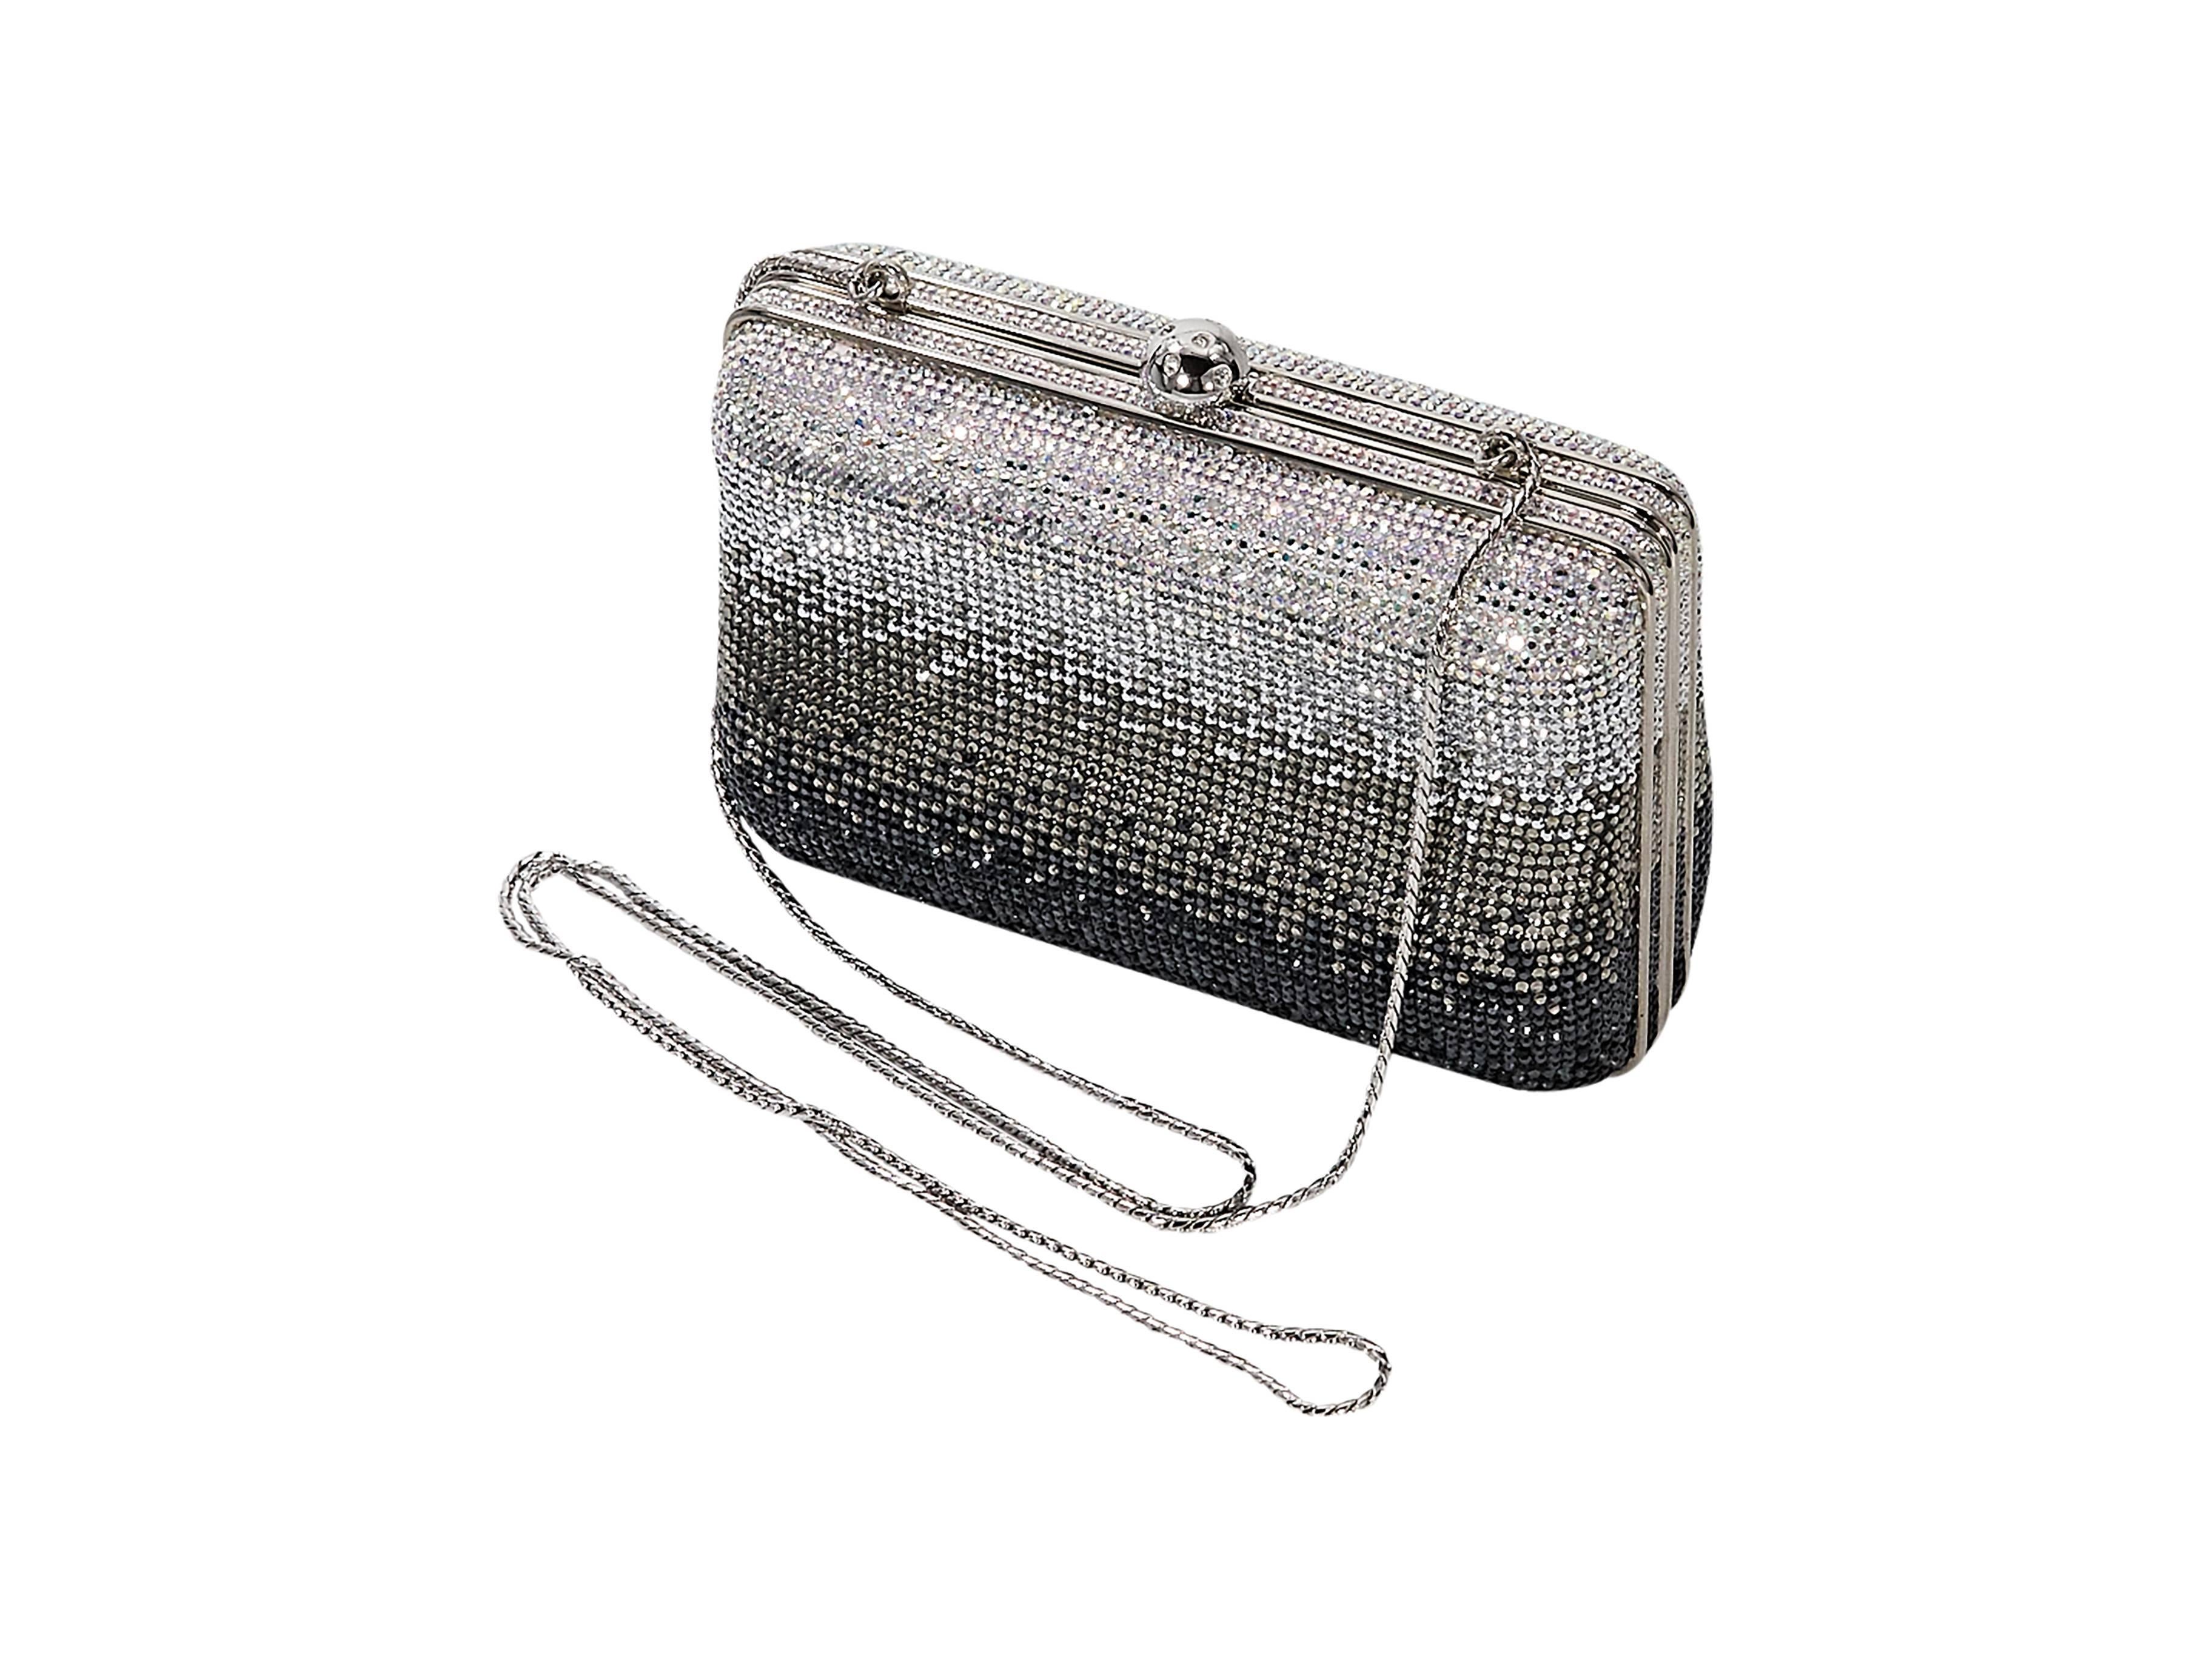 Product details: Silver and black ombre sequin clutch by Judith Leiber. Tuck-away shoulder strap. Top push-lock closure. Lined interior. Silvertone hardware. Accessories included. 
Condition: Very good. 
Est. Retail $ 880.00